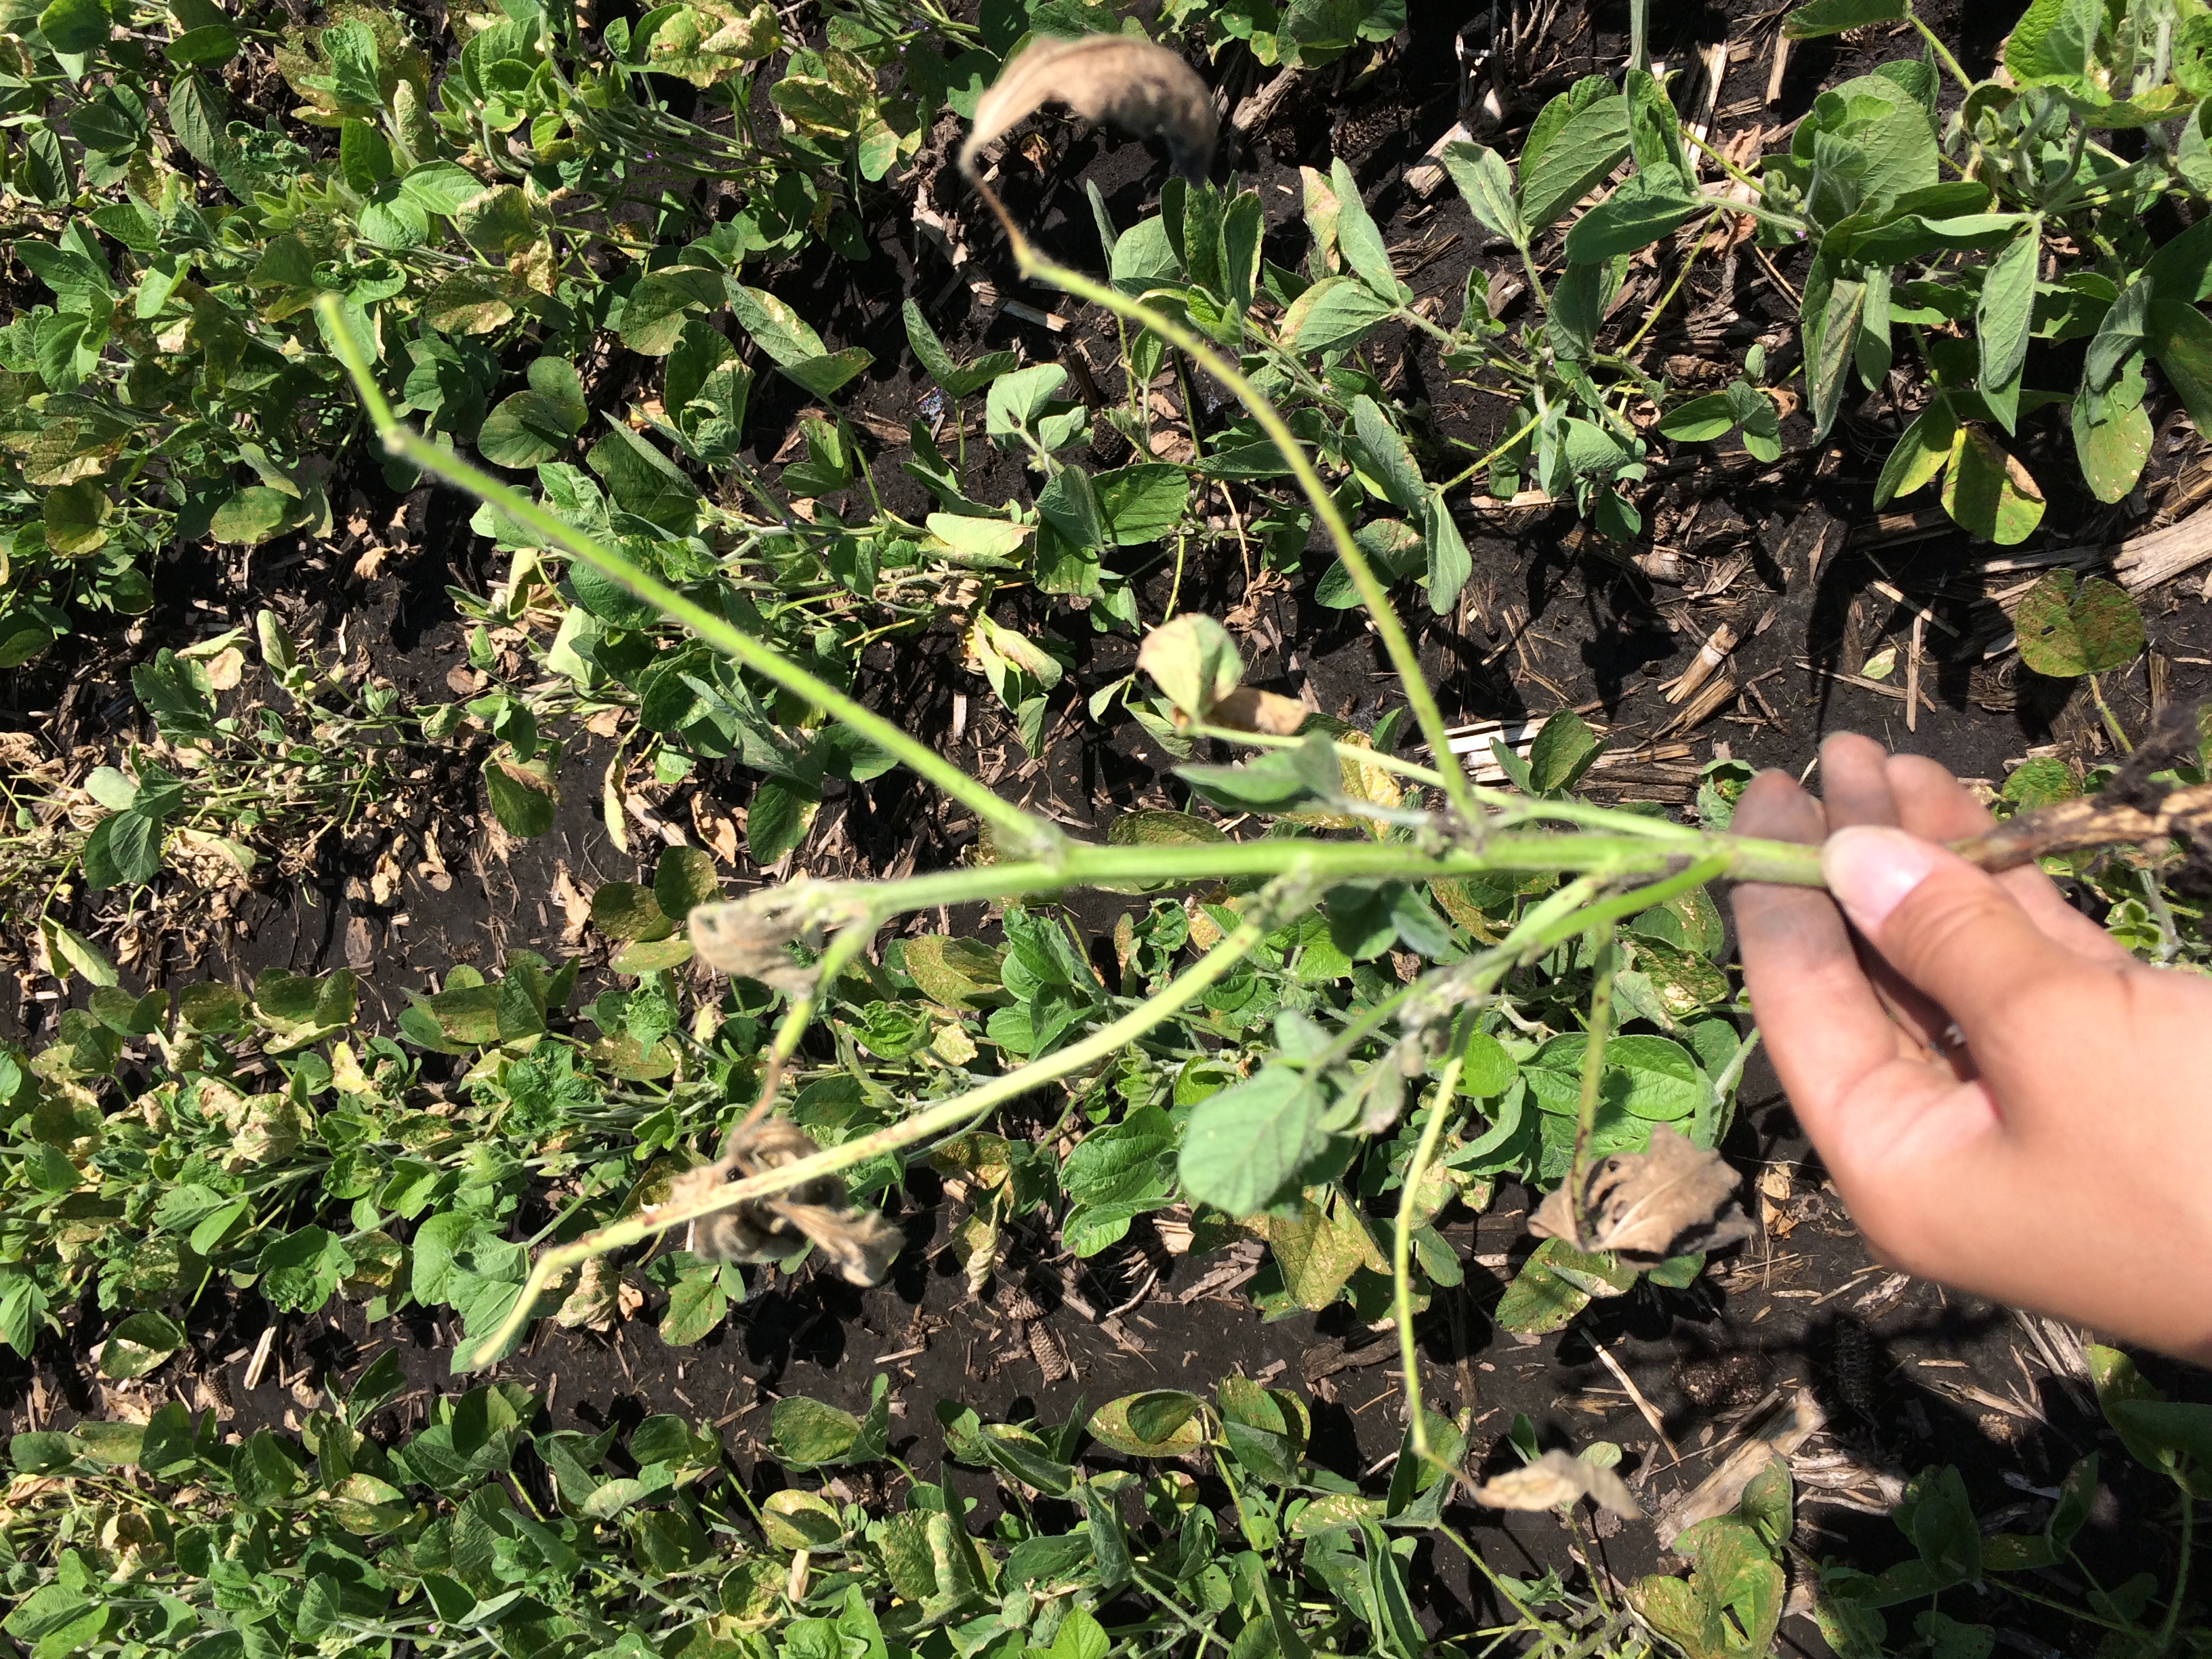 Wilting of soybean stem tips is a symptom of Fusarium root rot and wilt.